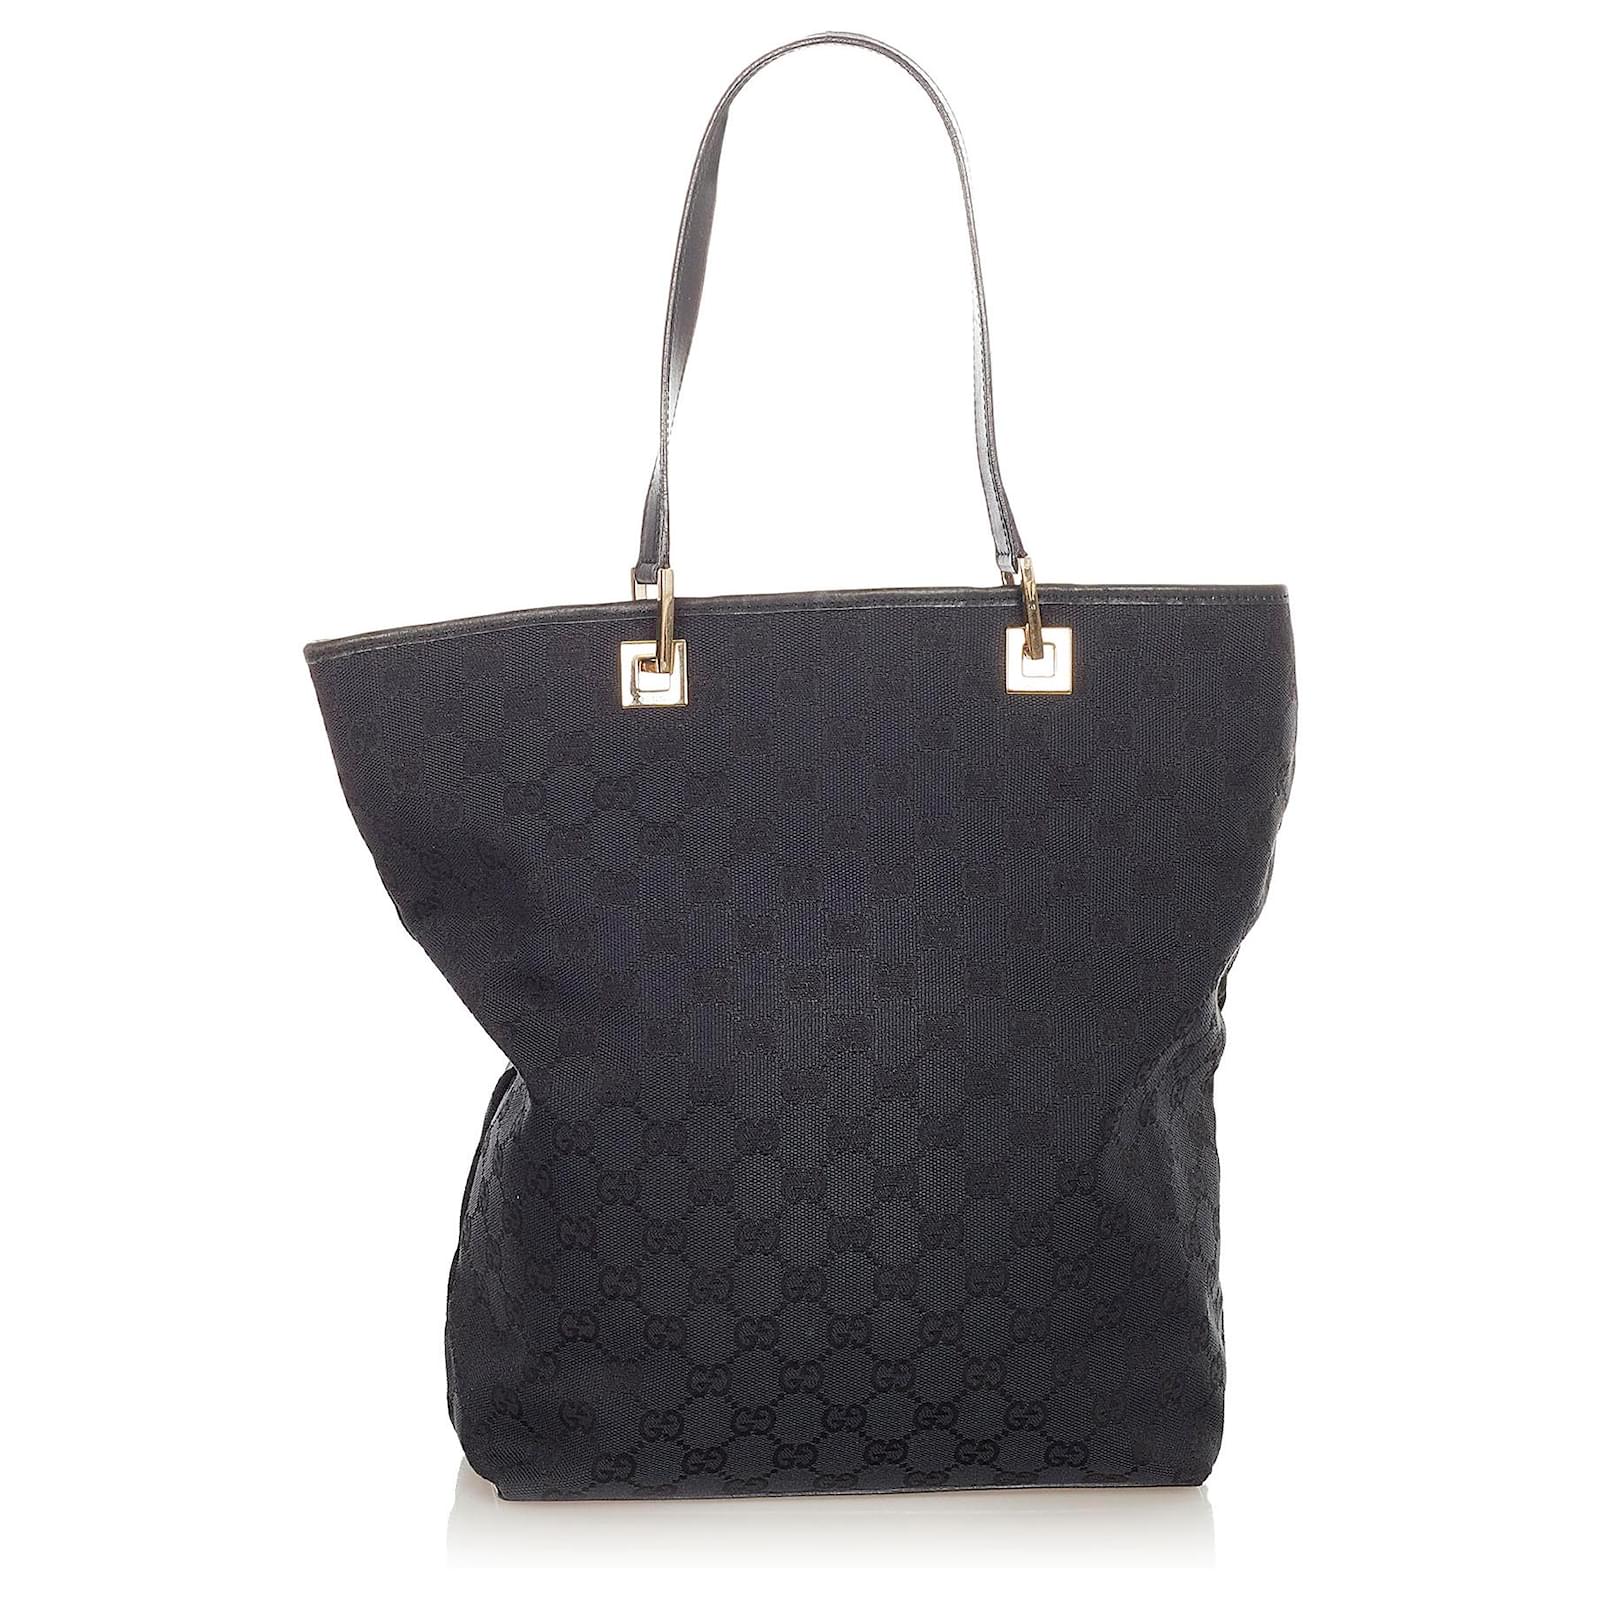 Gucci Black GG Canvas Tote Bag Leather Cloth Pony-style calfskin Cloth ...